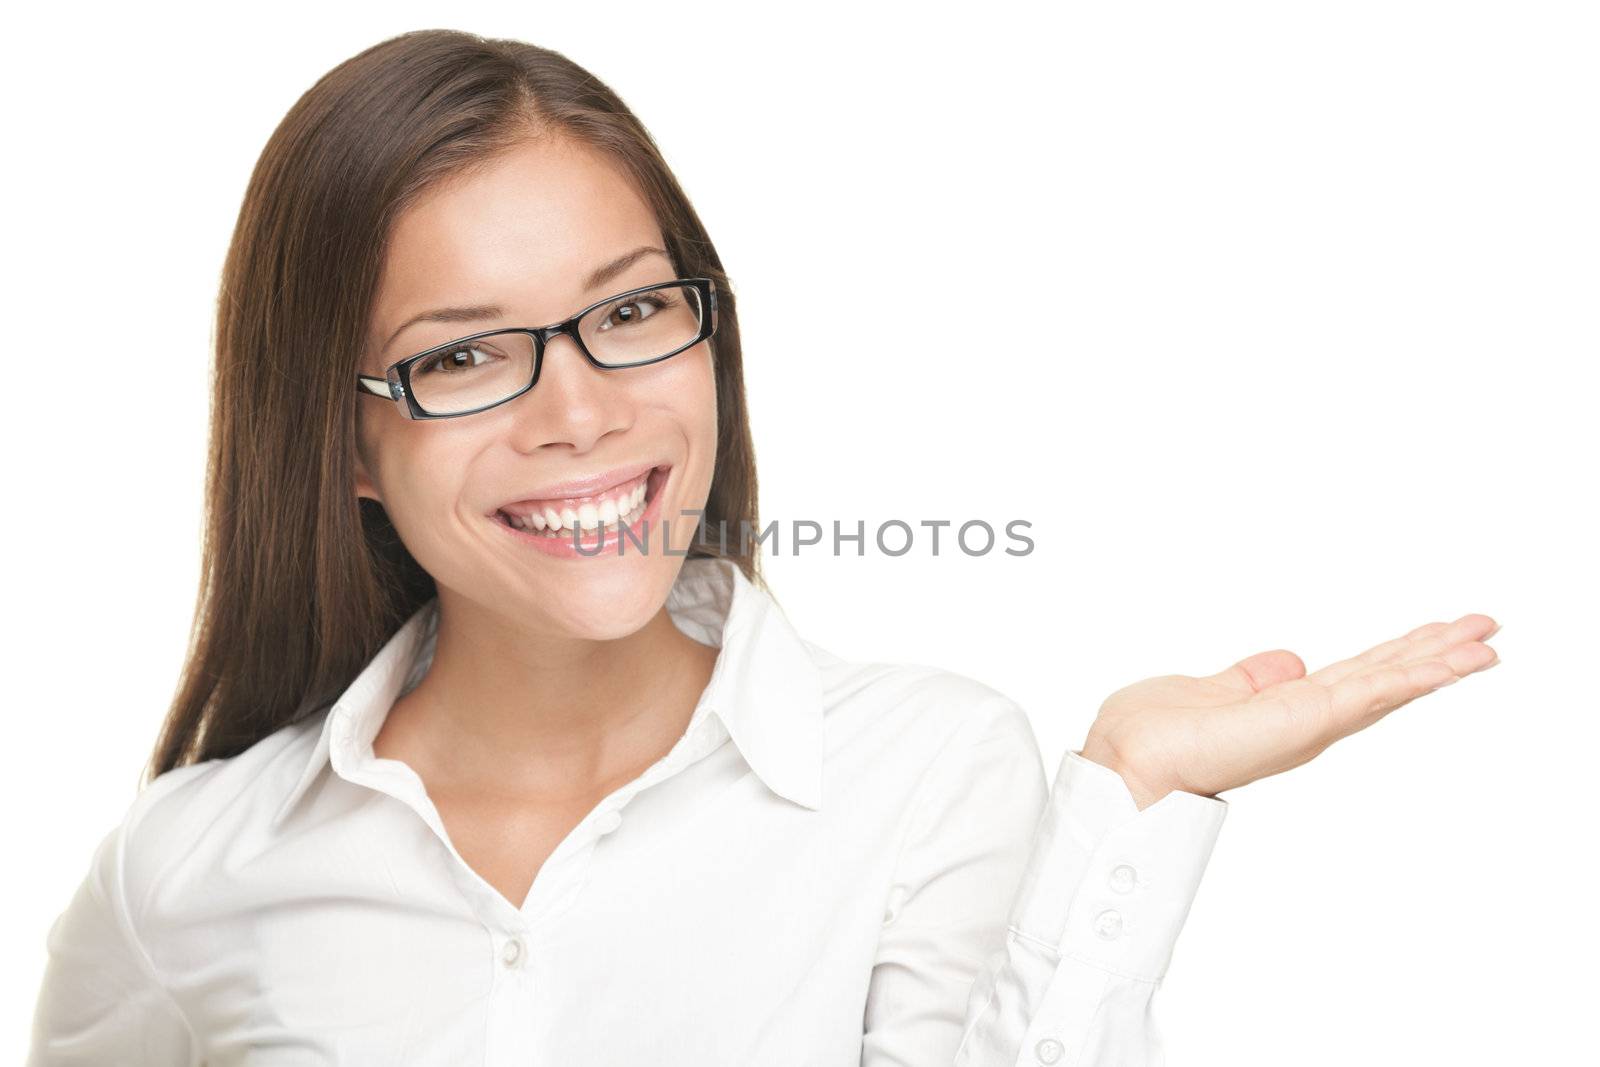 Woman showing copy space for product with open hand palm - smiling friendly expression on young businesswoman wearing glasses, Isolated on white background. Mixed Asian / Caucasian model. 